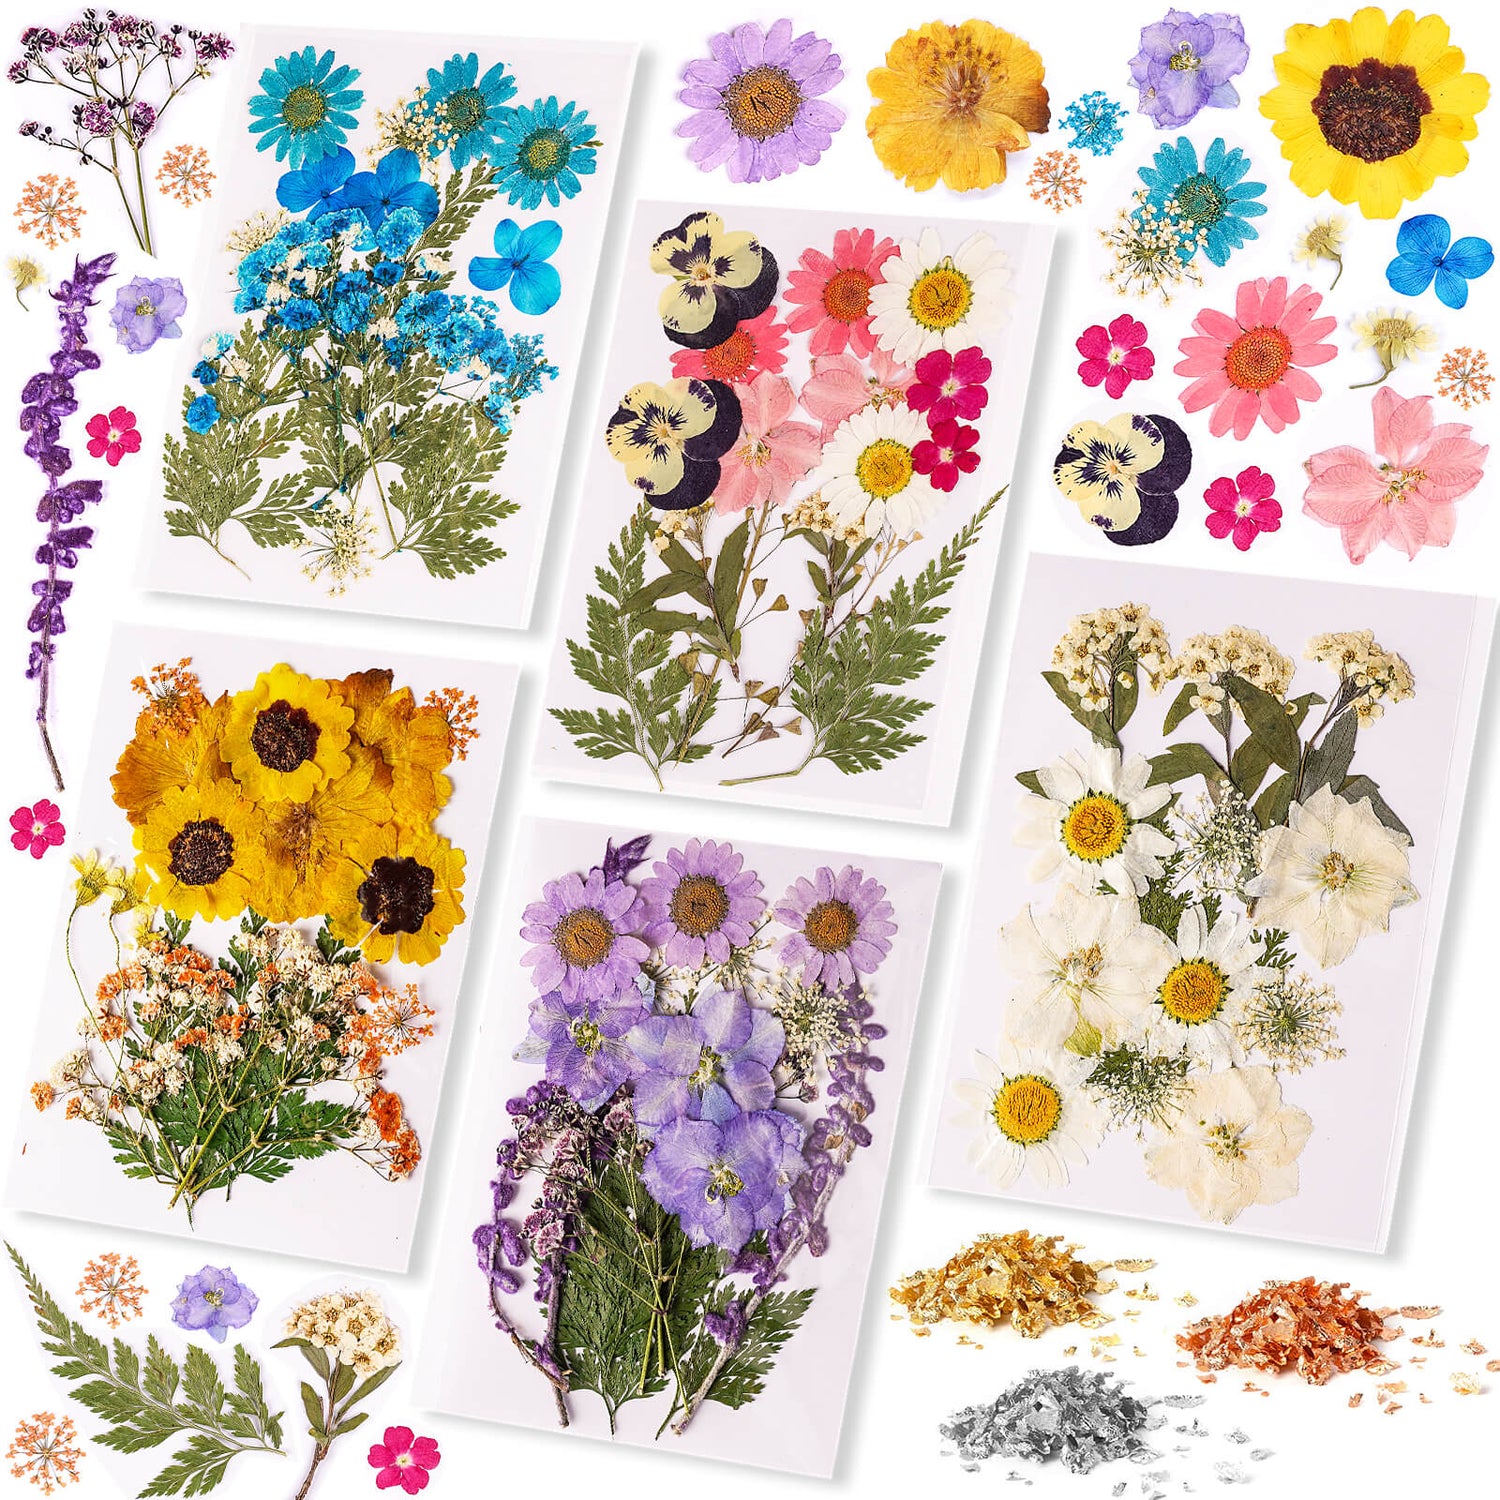 Wholesale 5 Bags 5 Patterns Pressed Dried Flowers 